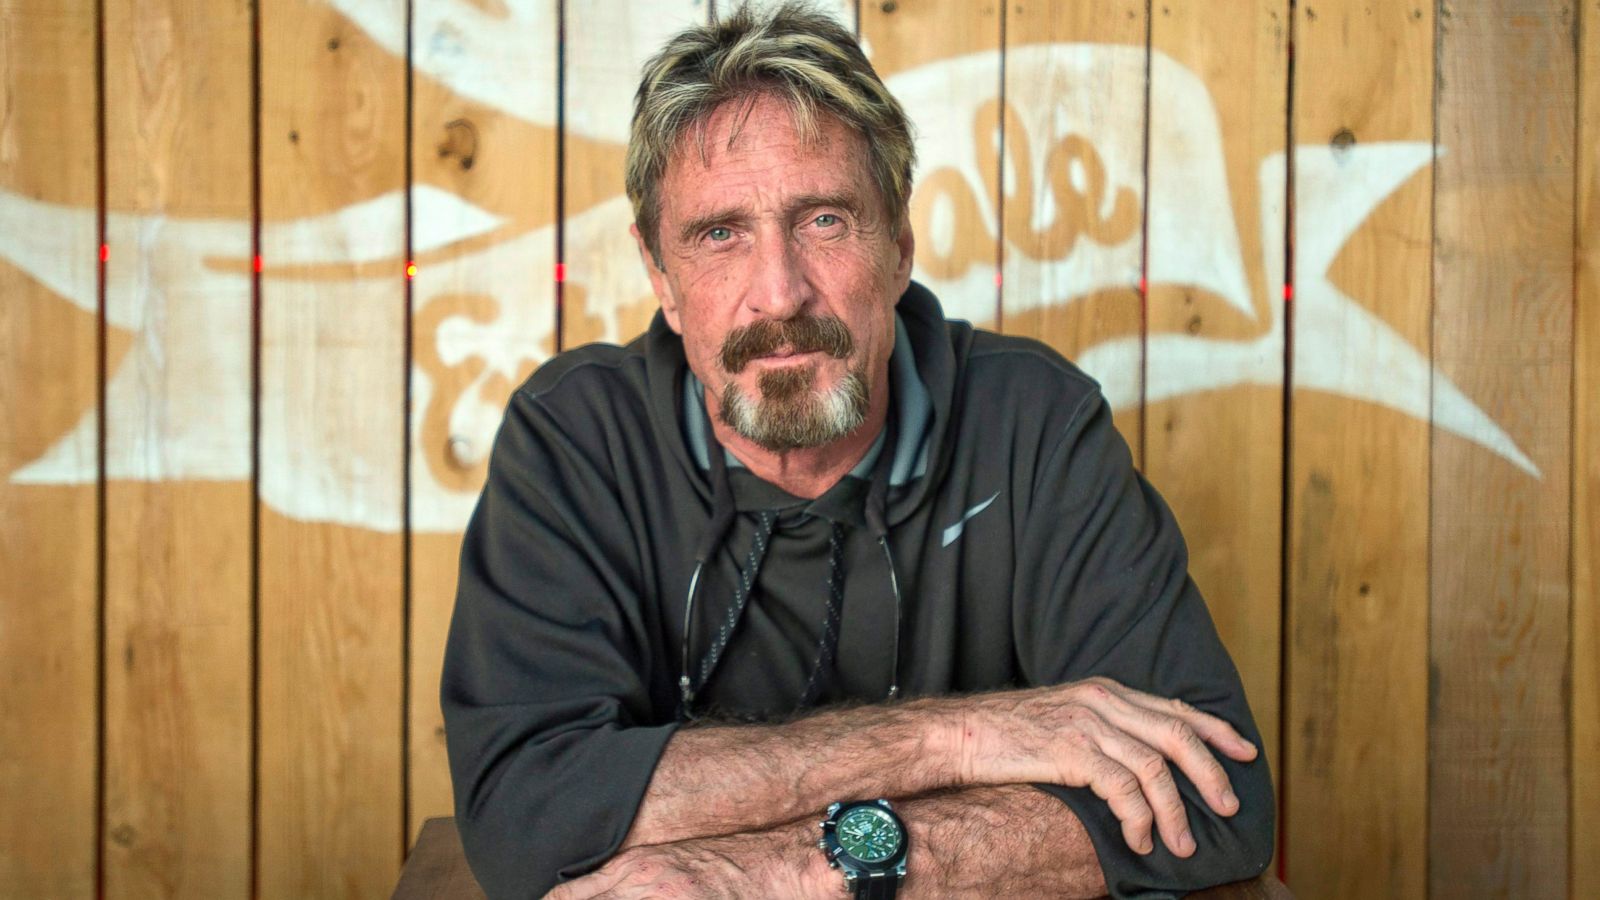 McAfee Founder Who Fled Belize Now Subject of Bizarre &#39;Protective Order&#39; -  ABC News